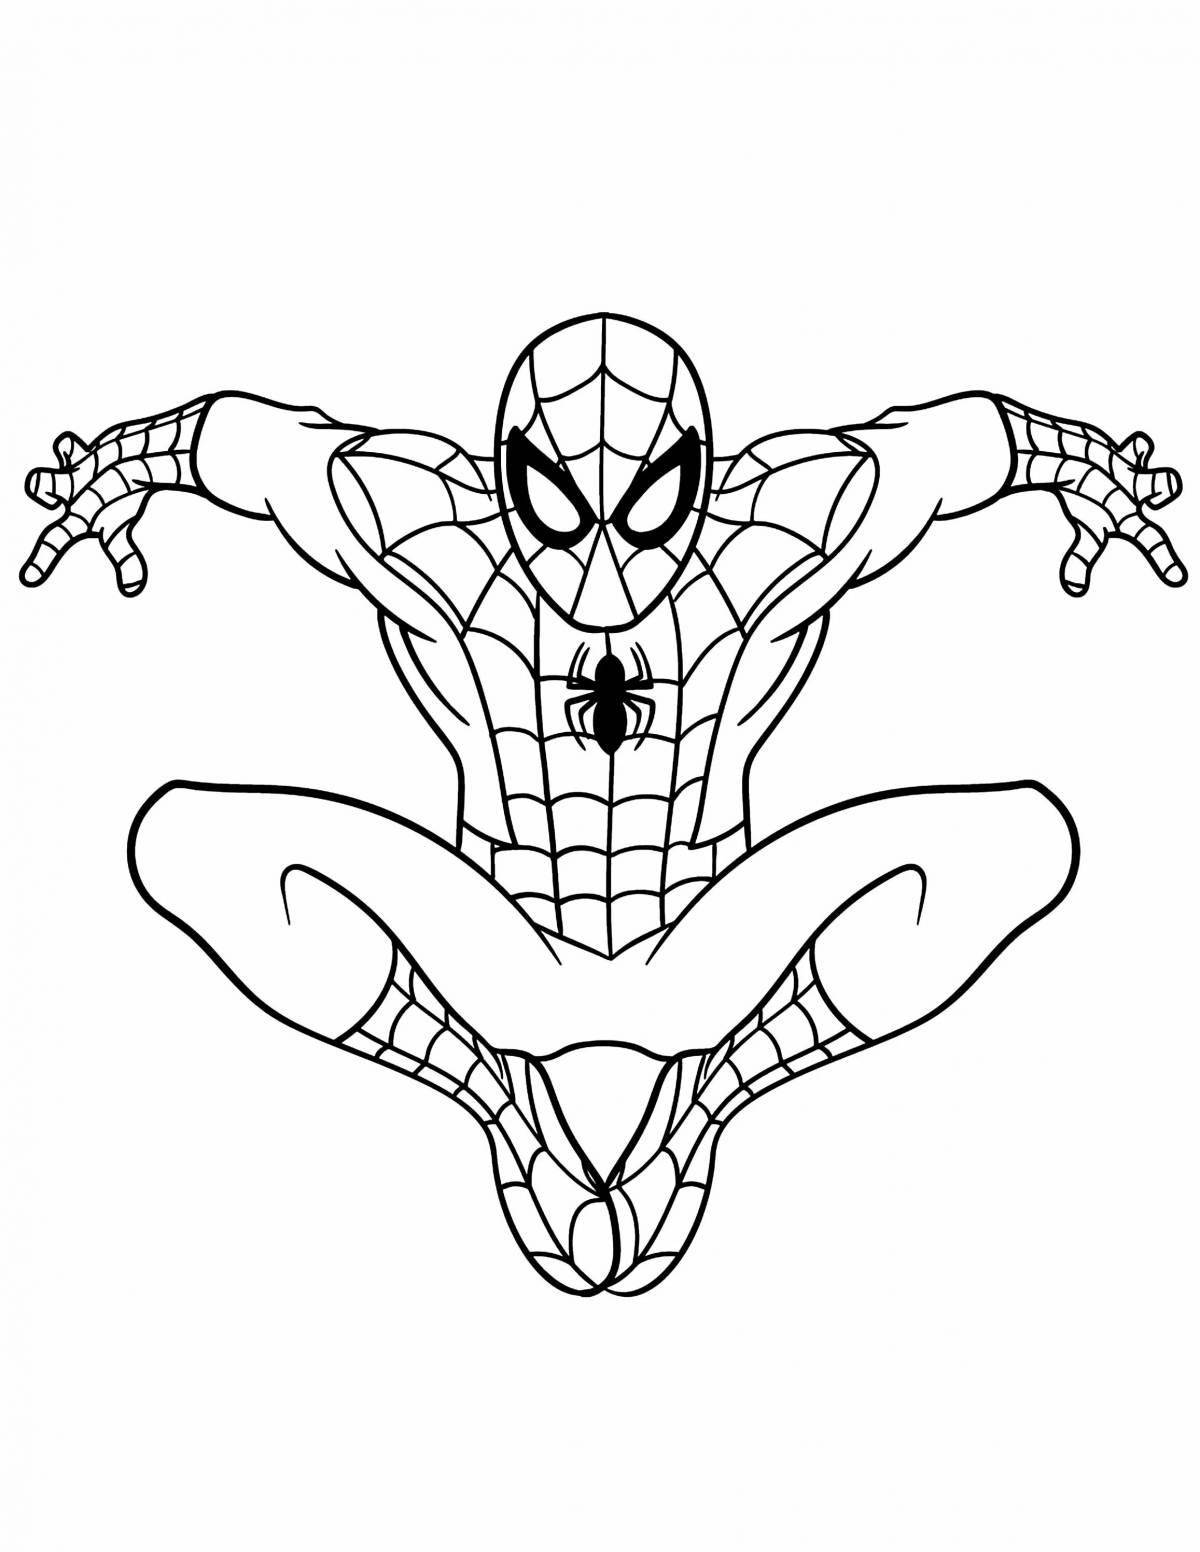 Exquisite spiderman team coloring page